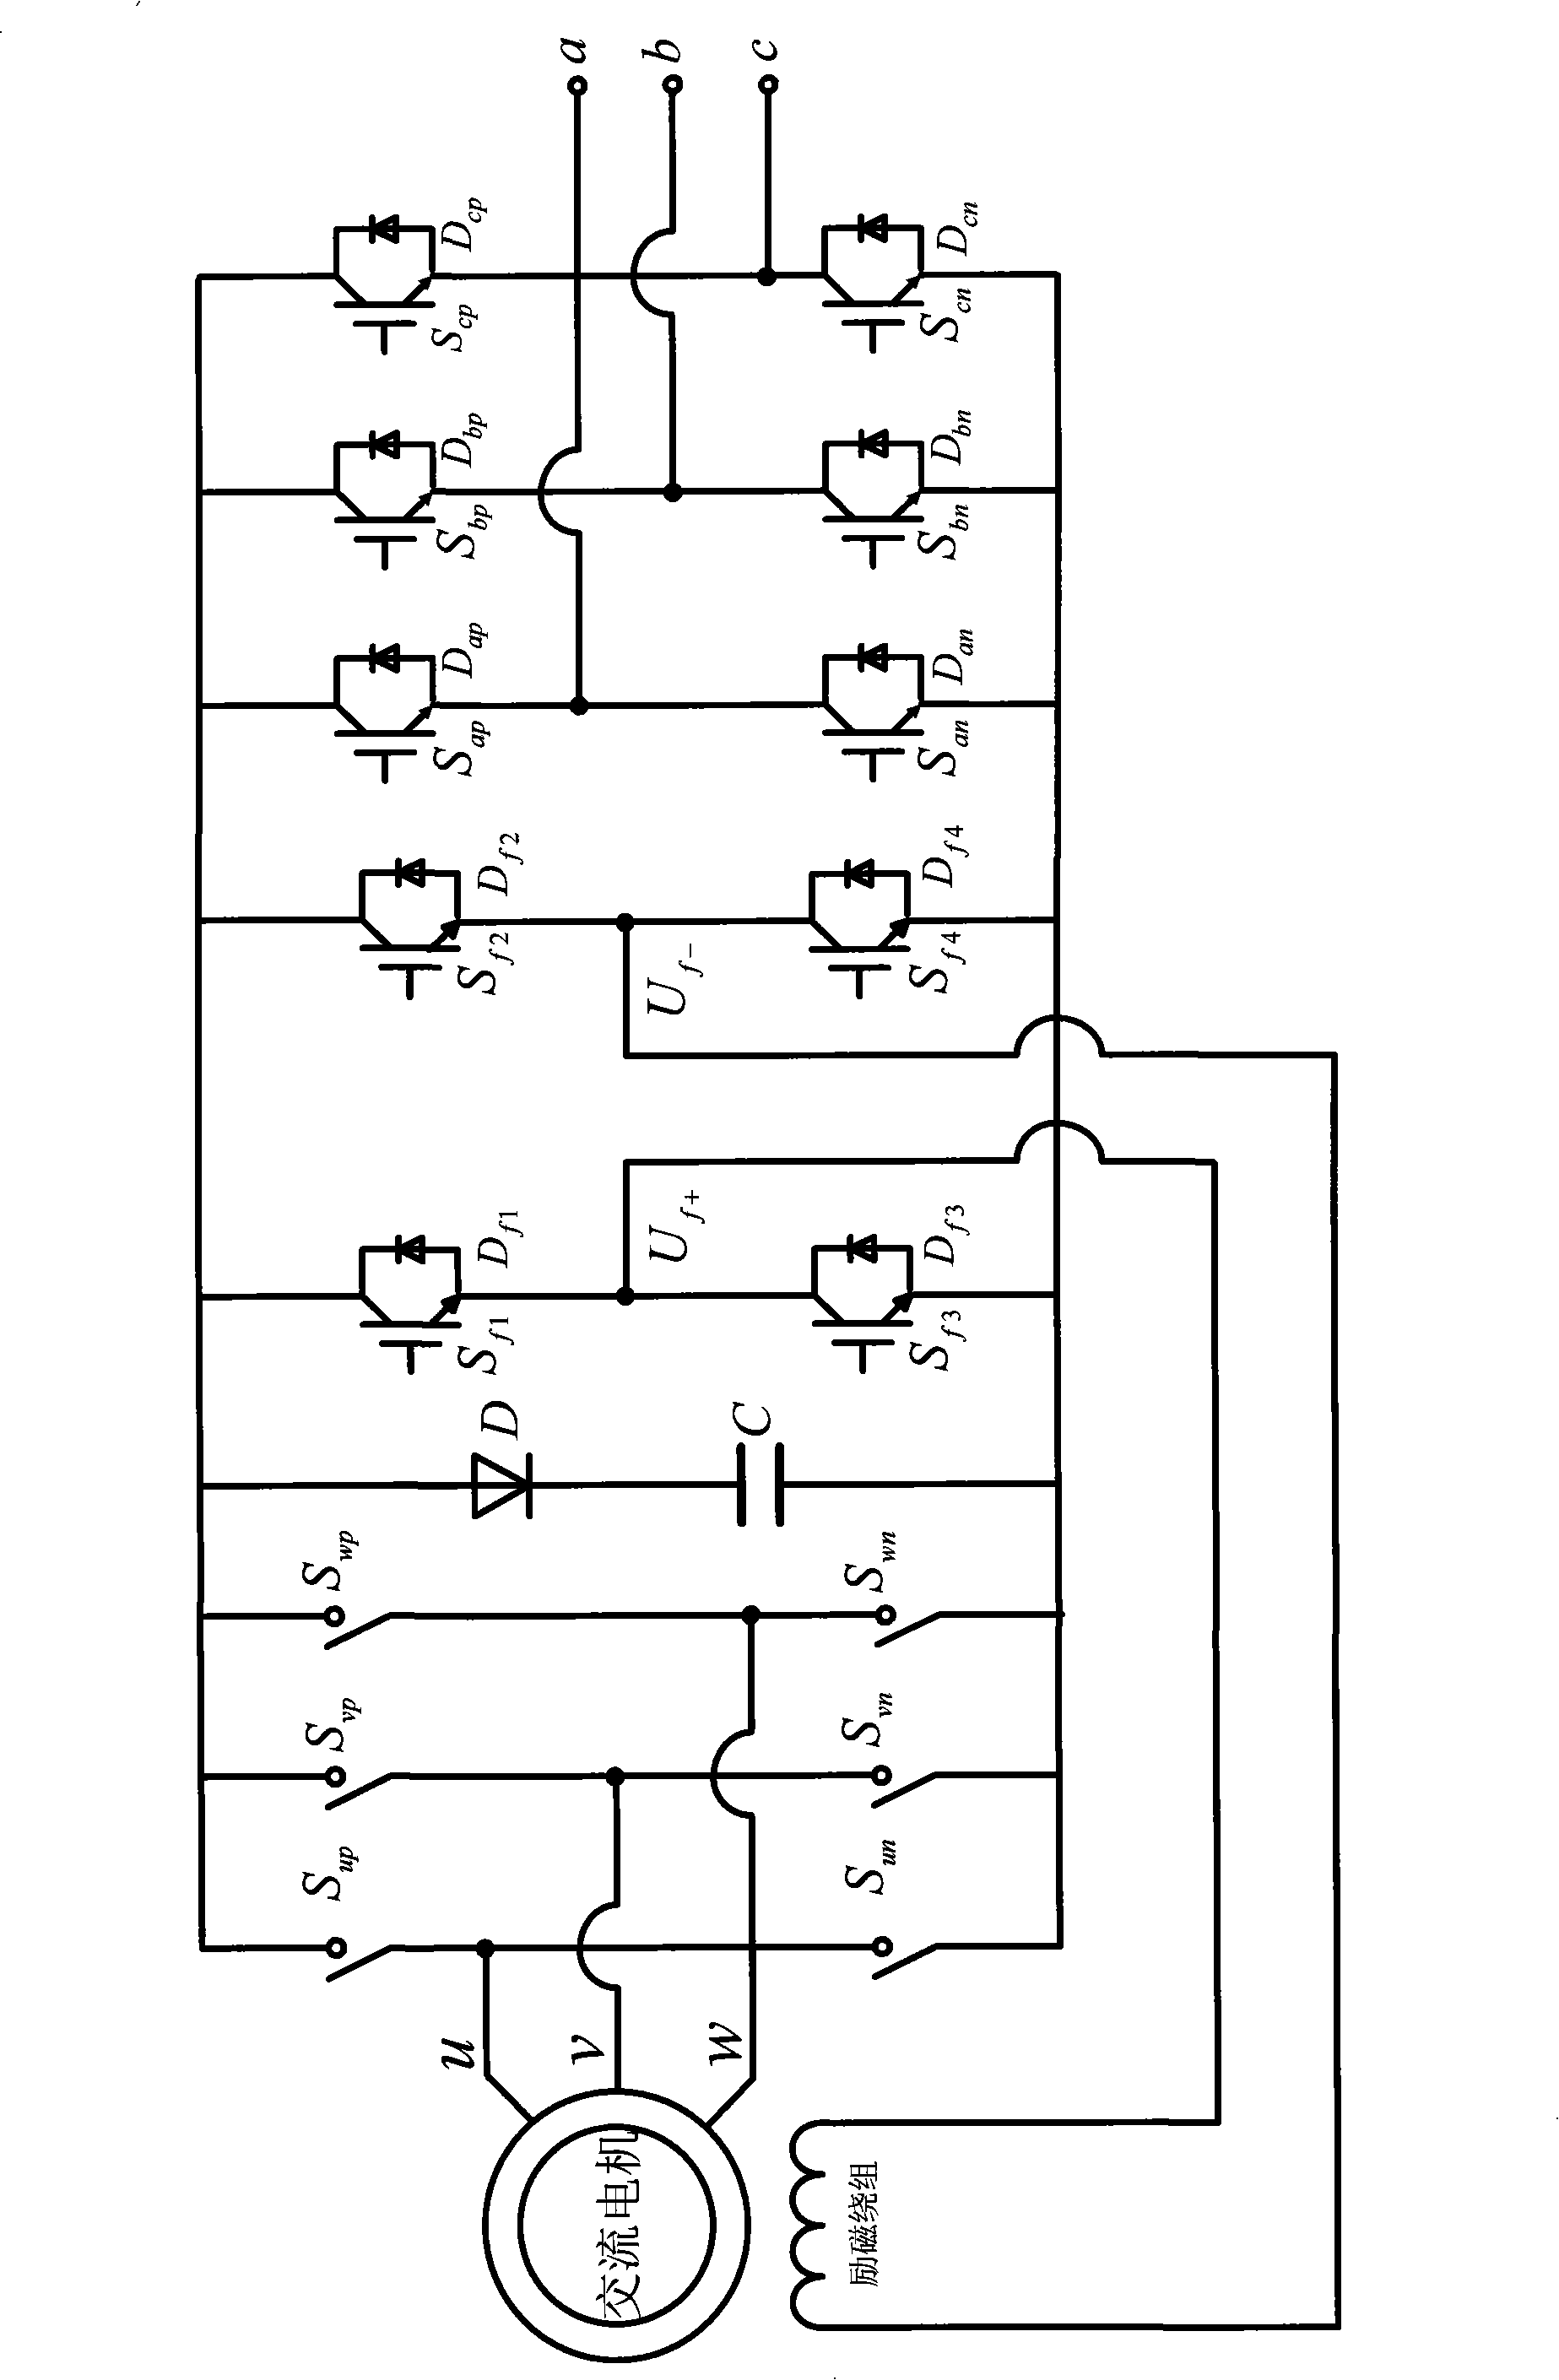 Twin-stage type matrix converter with direct-current excitation regulation and voltage frequency transformation